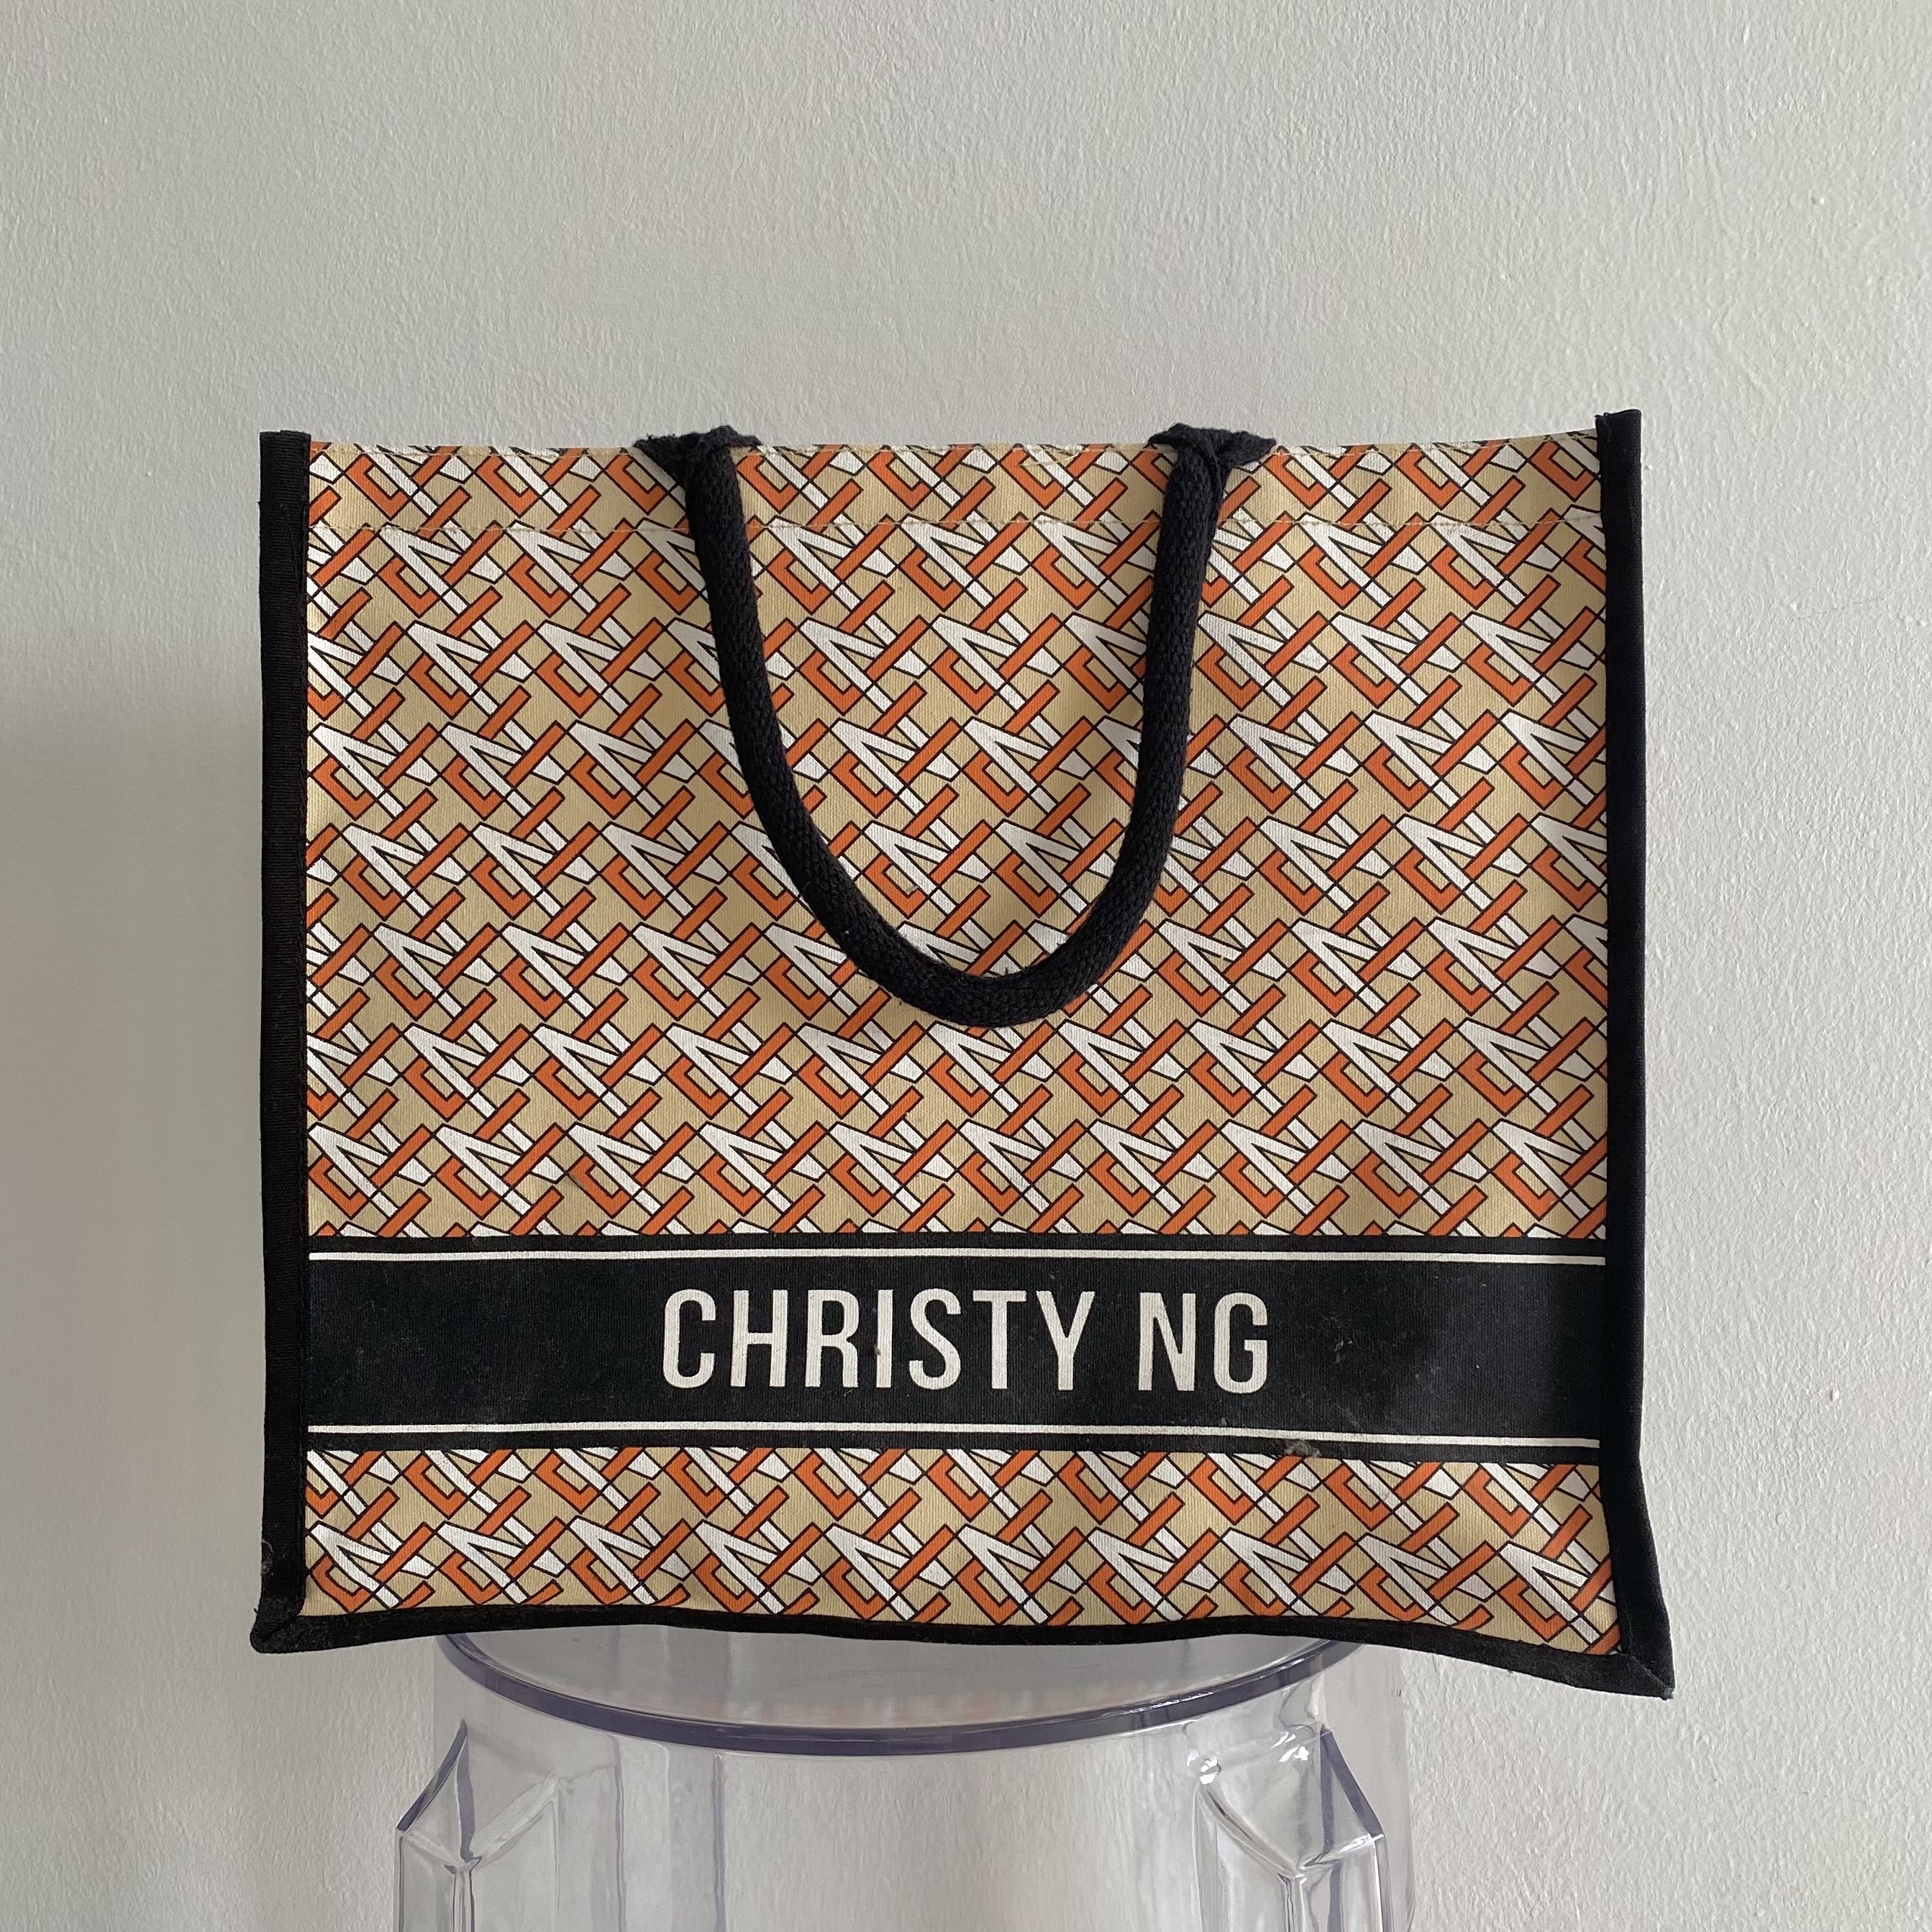 Monogram Tote Bag by Christy Ng, Women's Fashion, Bags & Wallets, Tote Bags  on Carousell